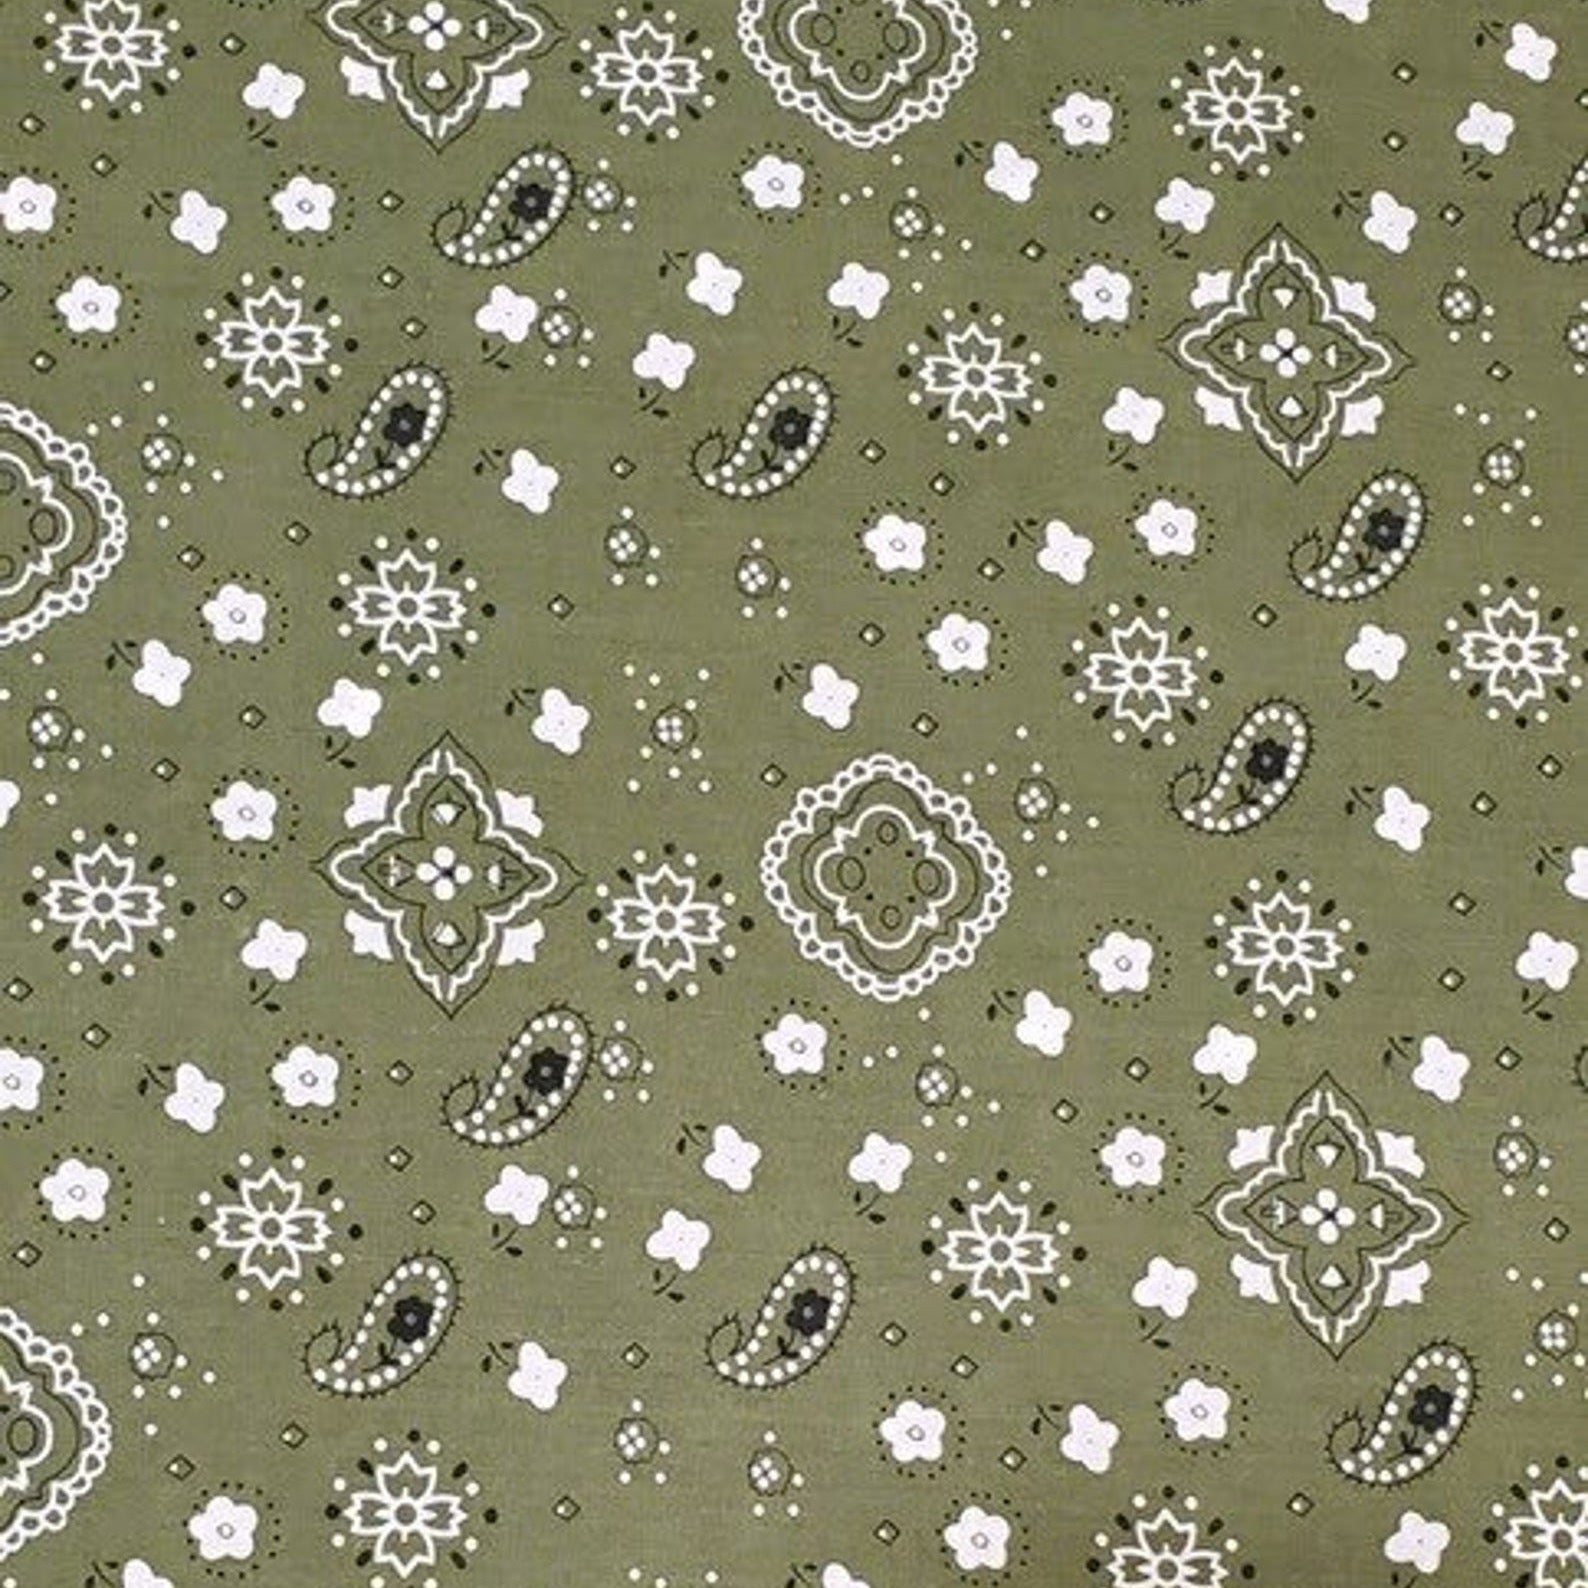 Annabella OLIVE GREEN Paisley Floral Print Bandana Poly Cotton Fabric by the Yard - 10115